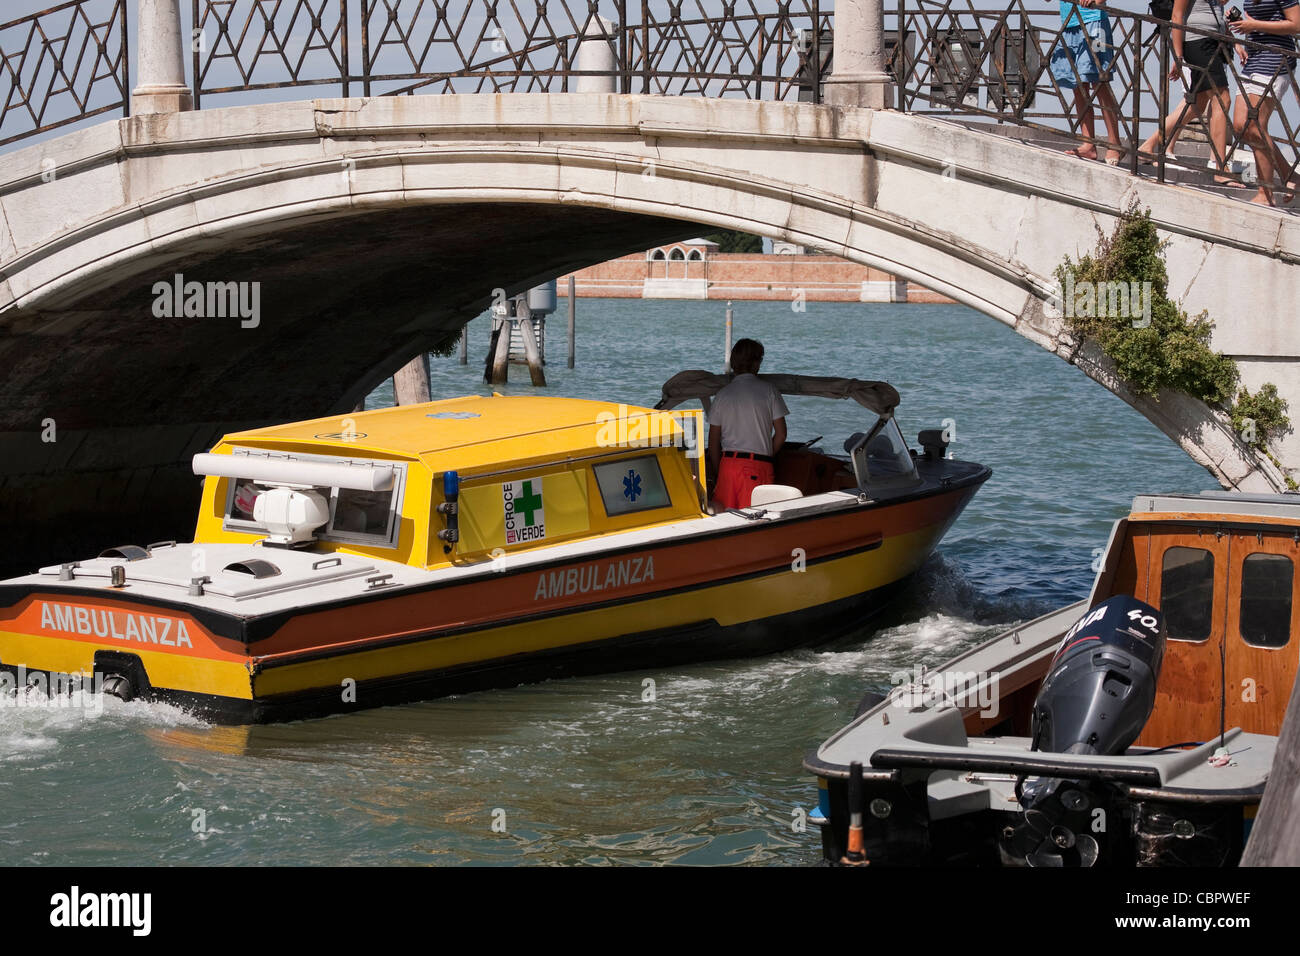 Ambulance boat going under a bridge on the canals of Venice, Italy. Stock Photo